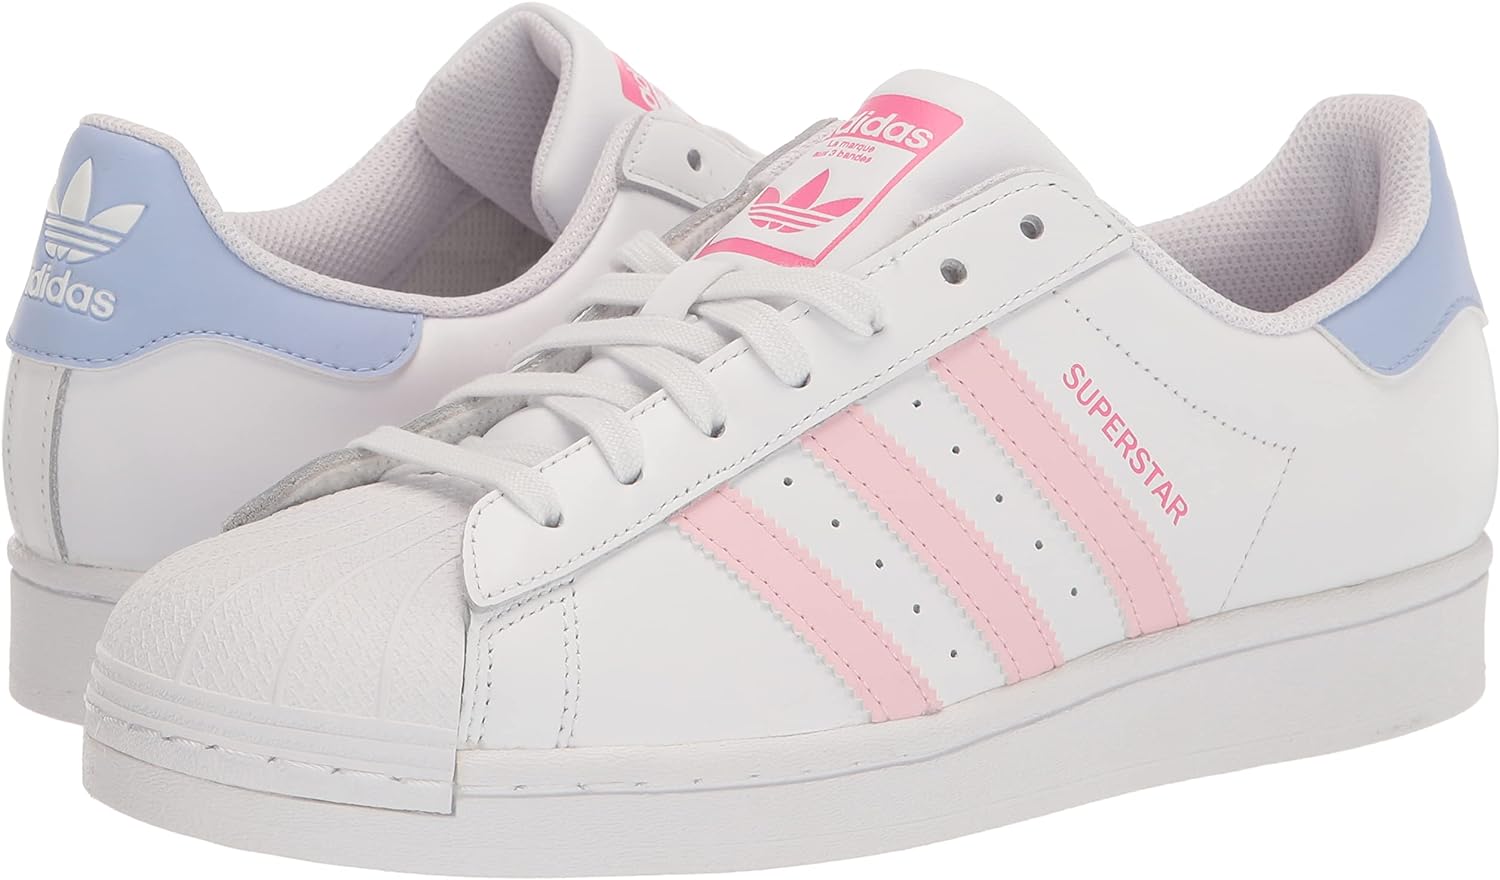 adidas Womens Superstar Sneaker, White/Clear Pink/Pulse Magenta, 6.5 Narrow